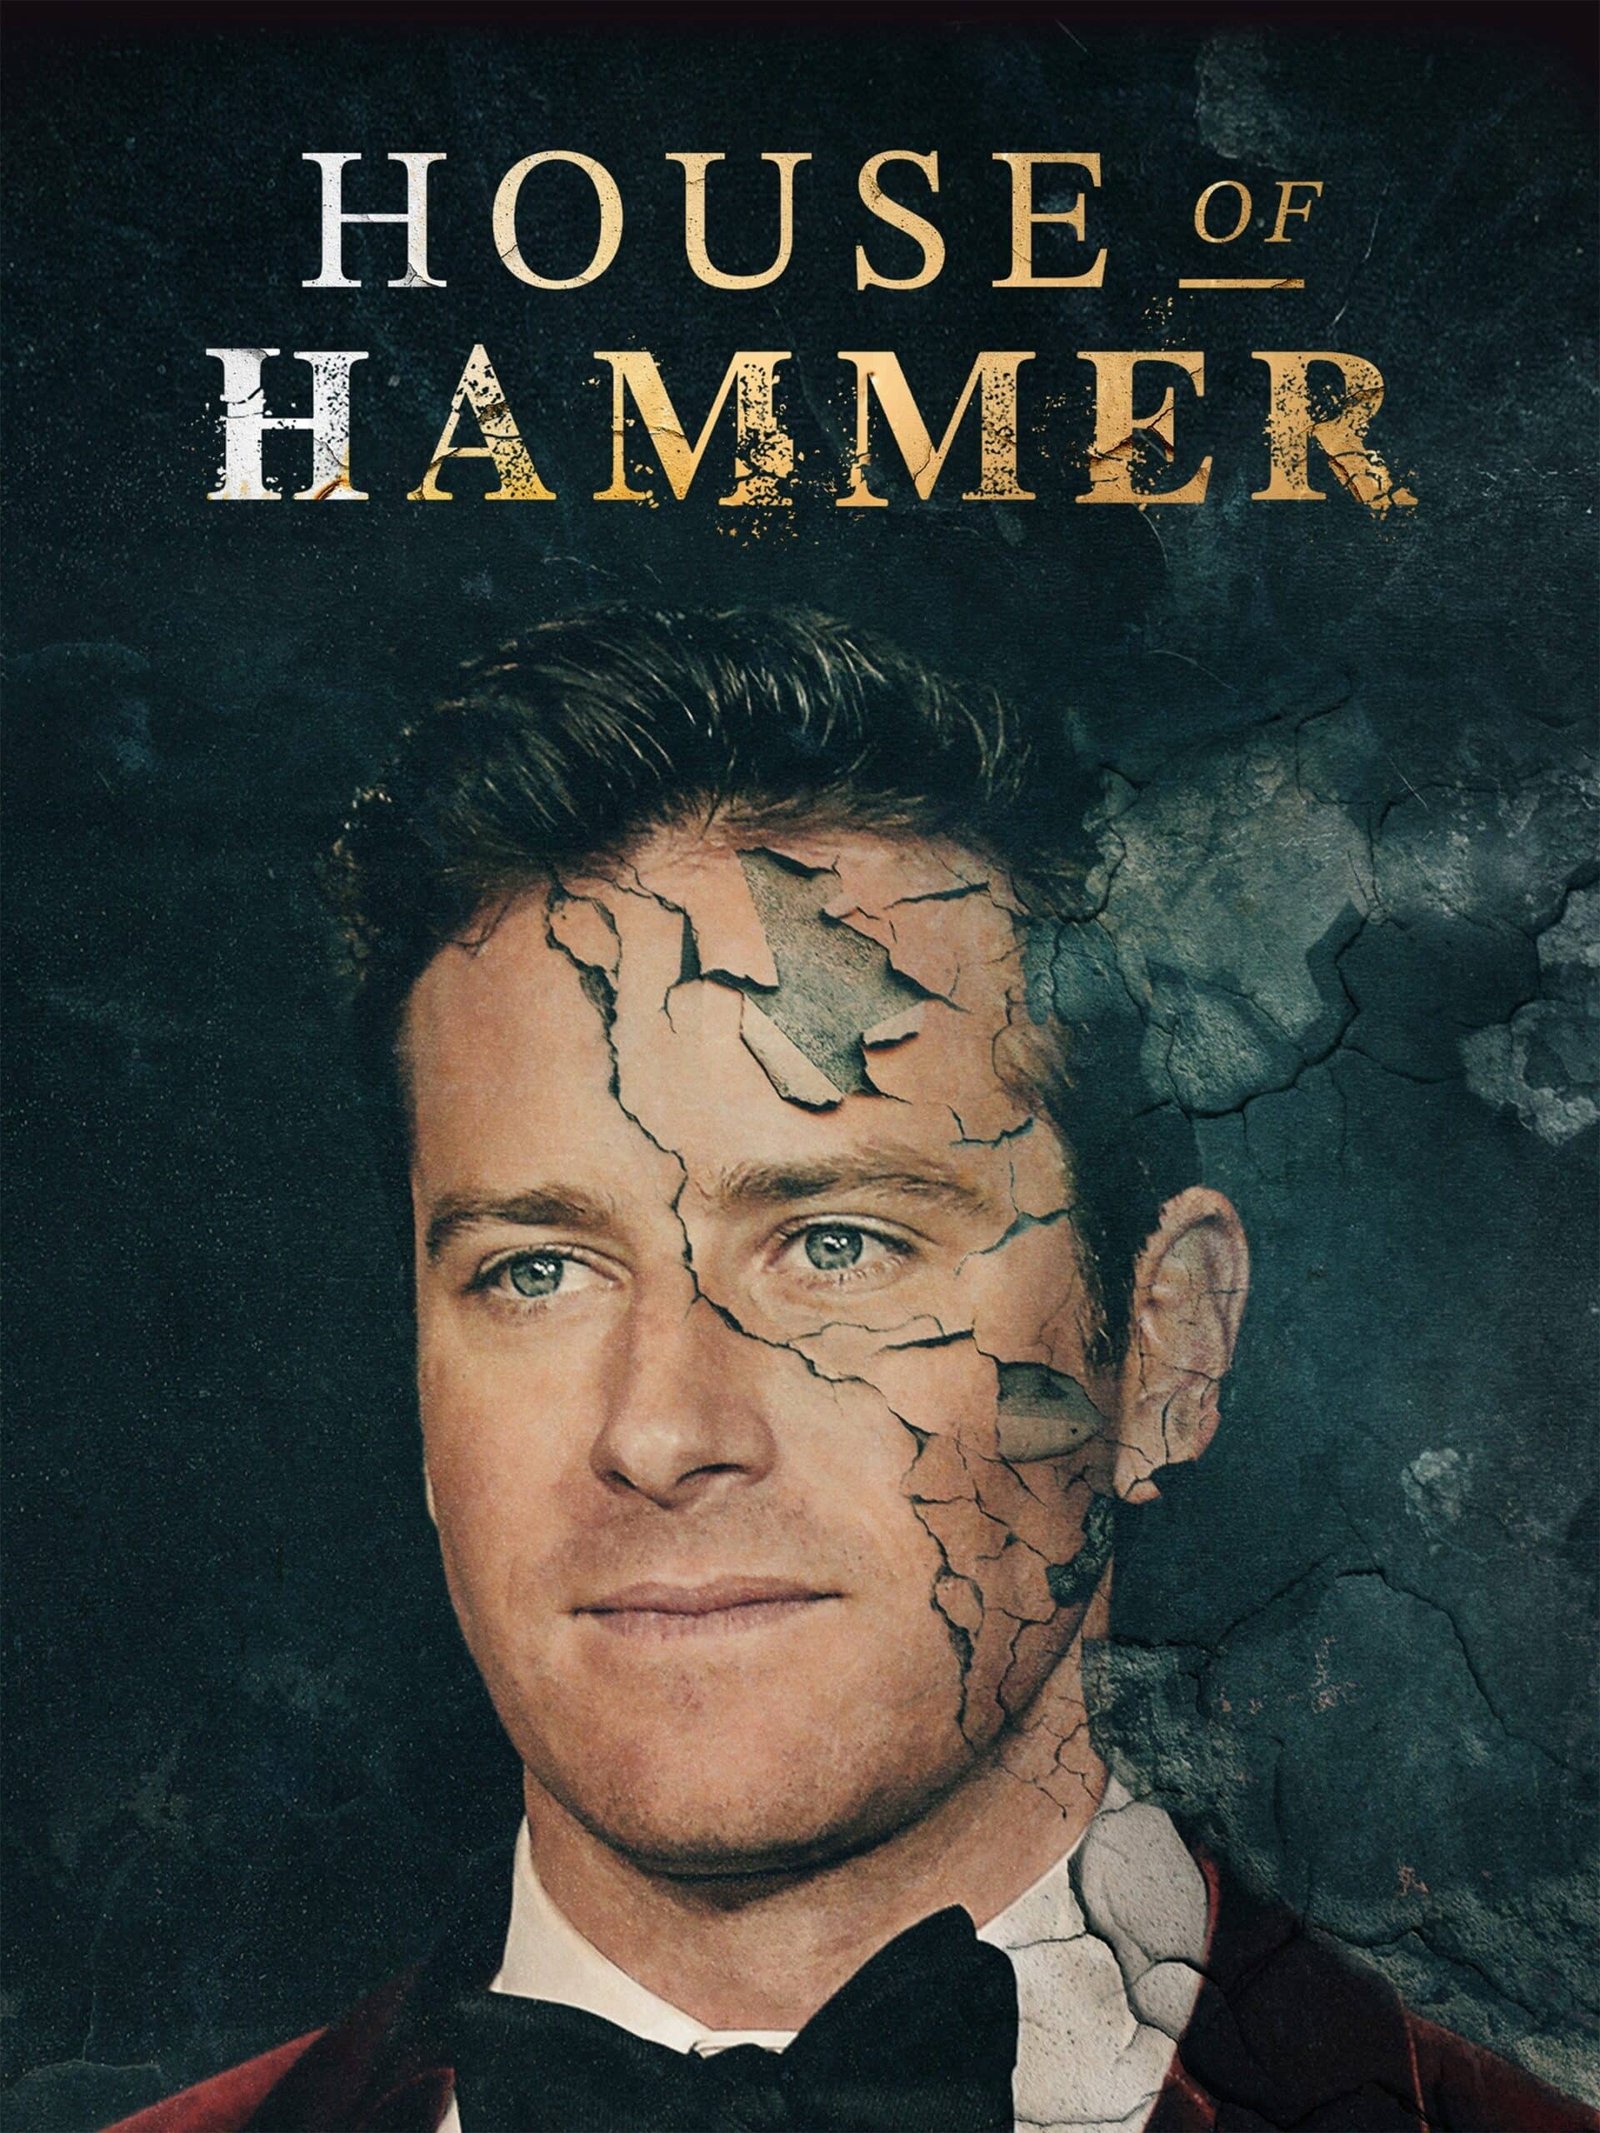 Is the House of Hammer a true story?